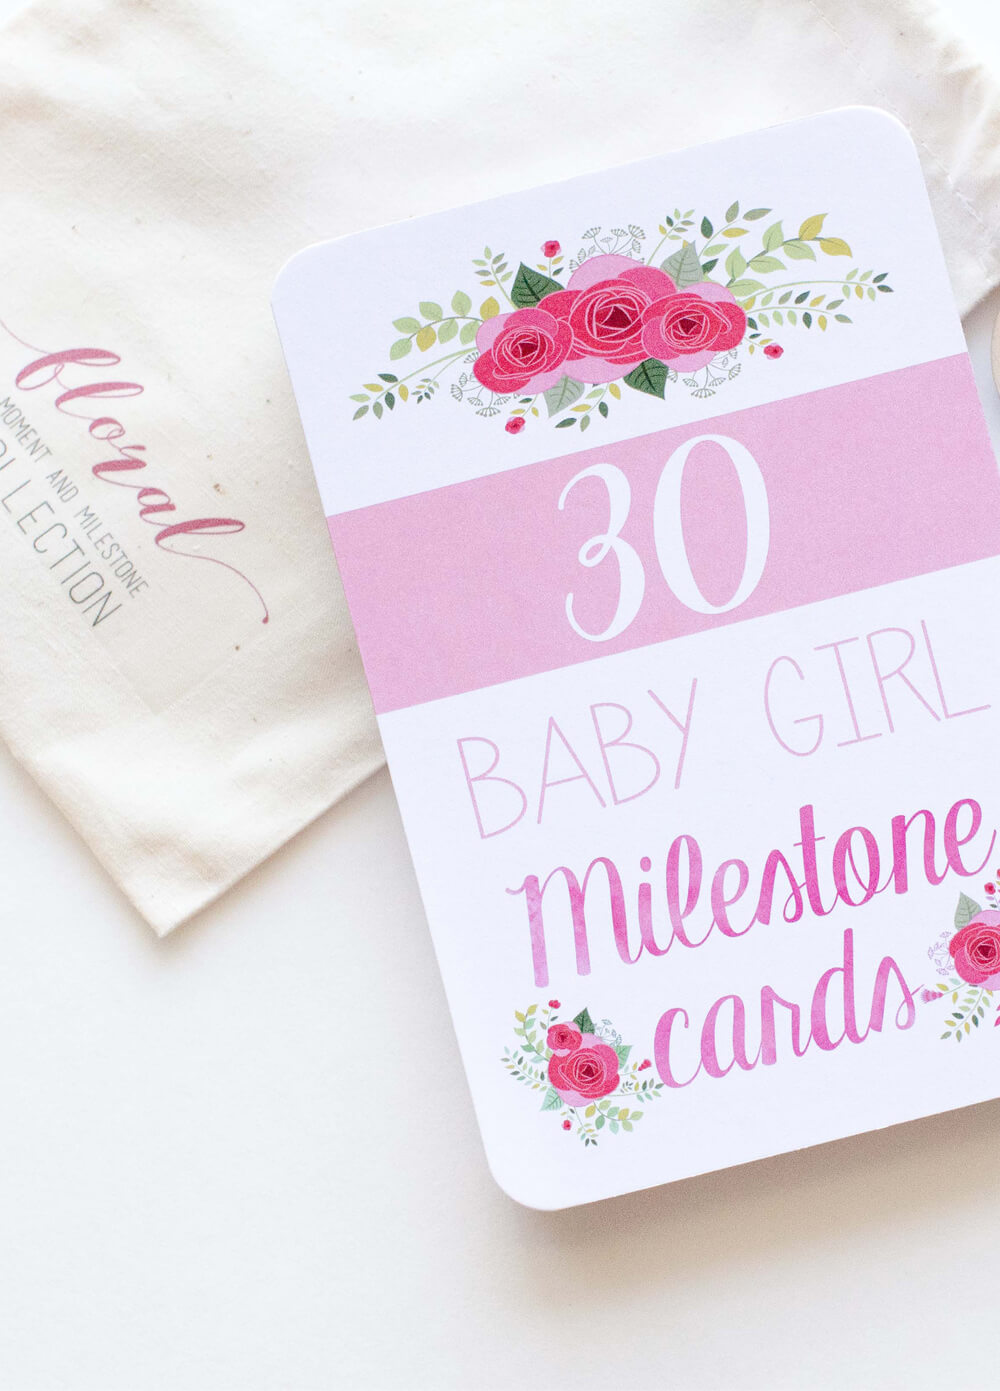 Baby Girl Milestone Cards in Floral Design by Blossom & Pear